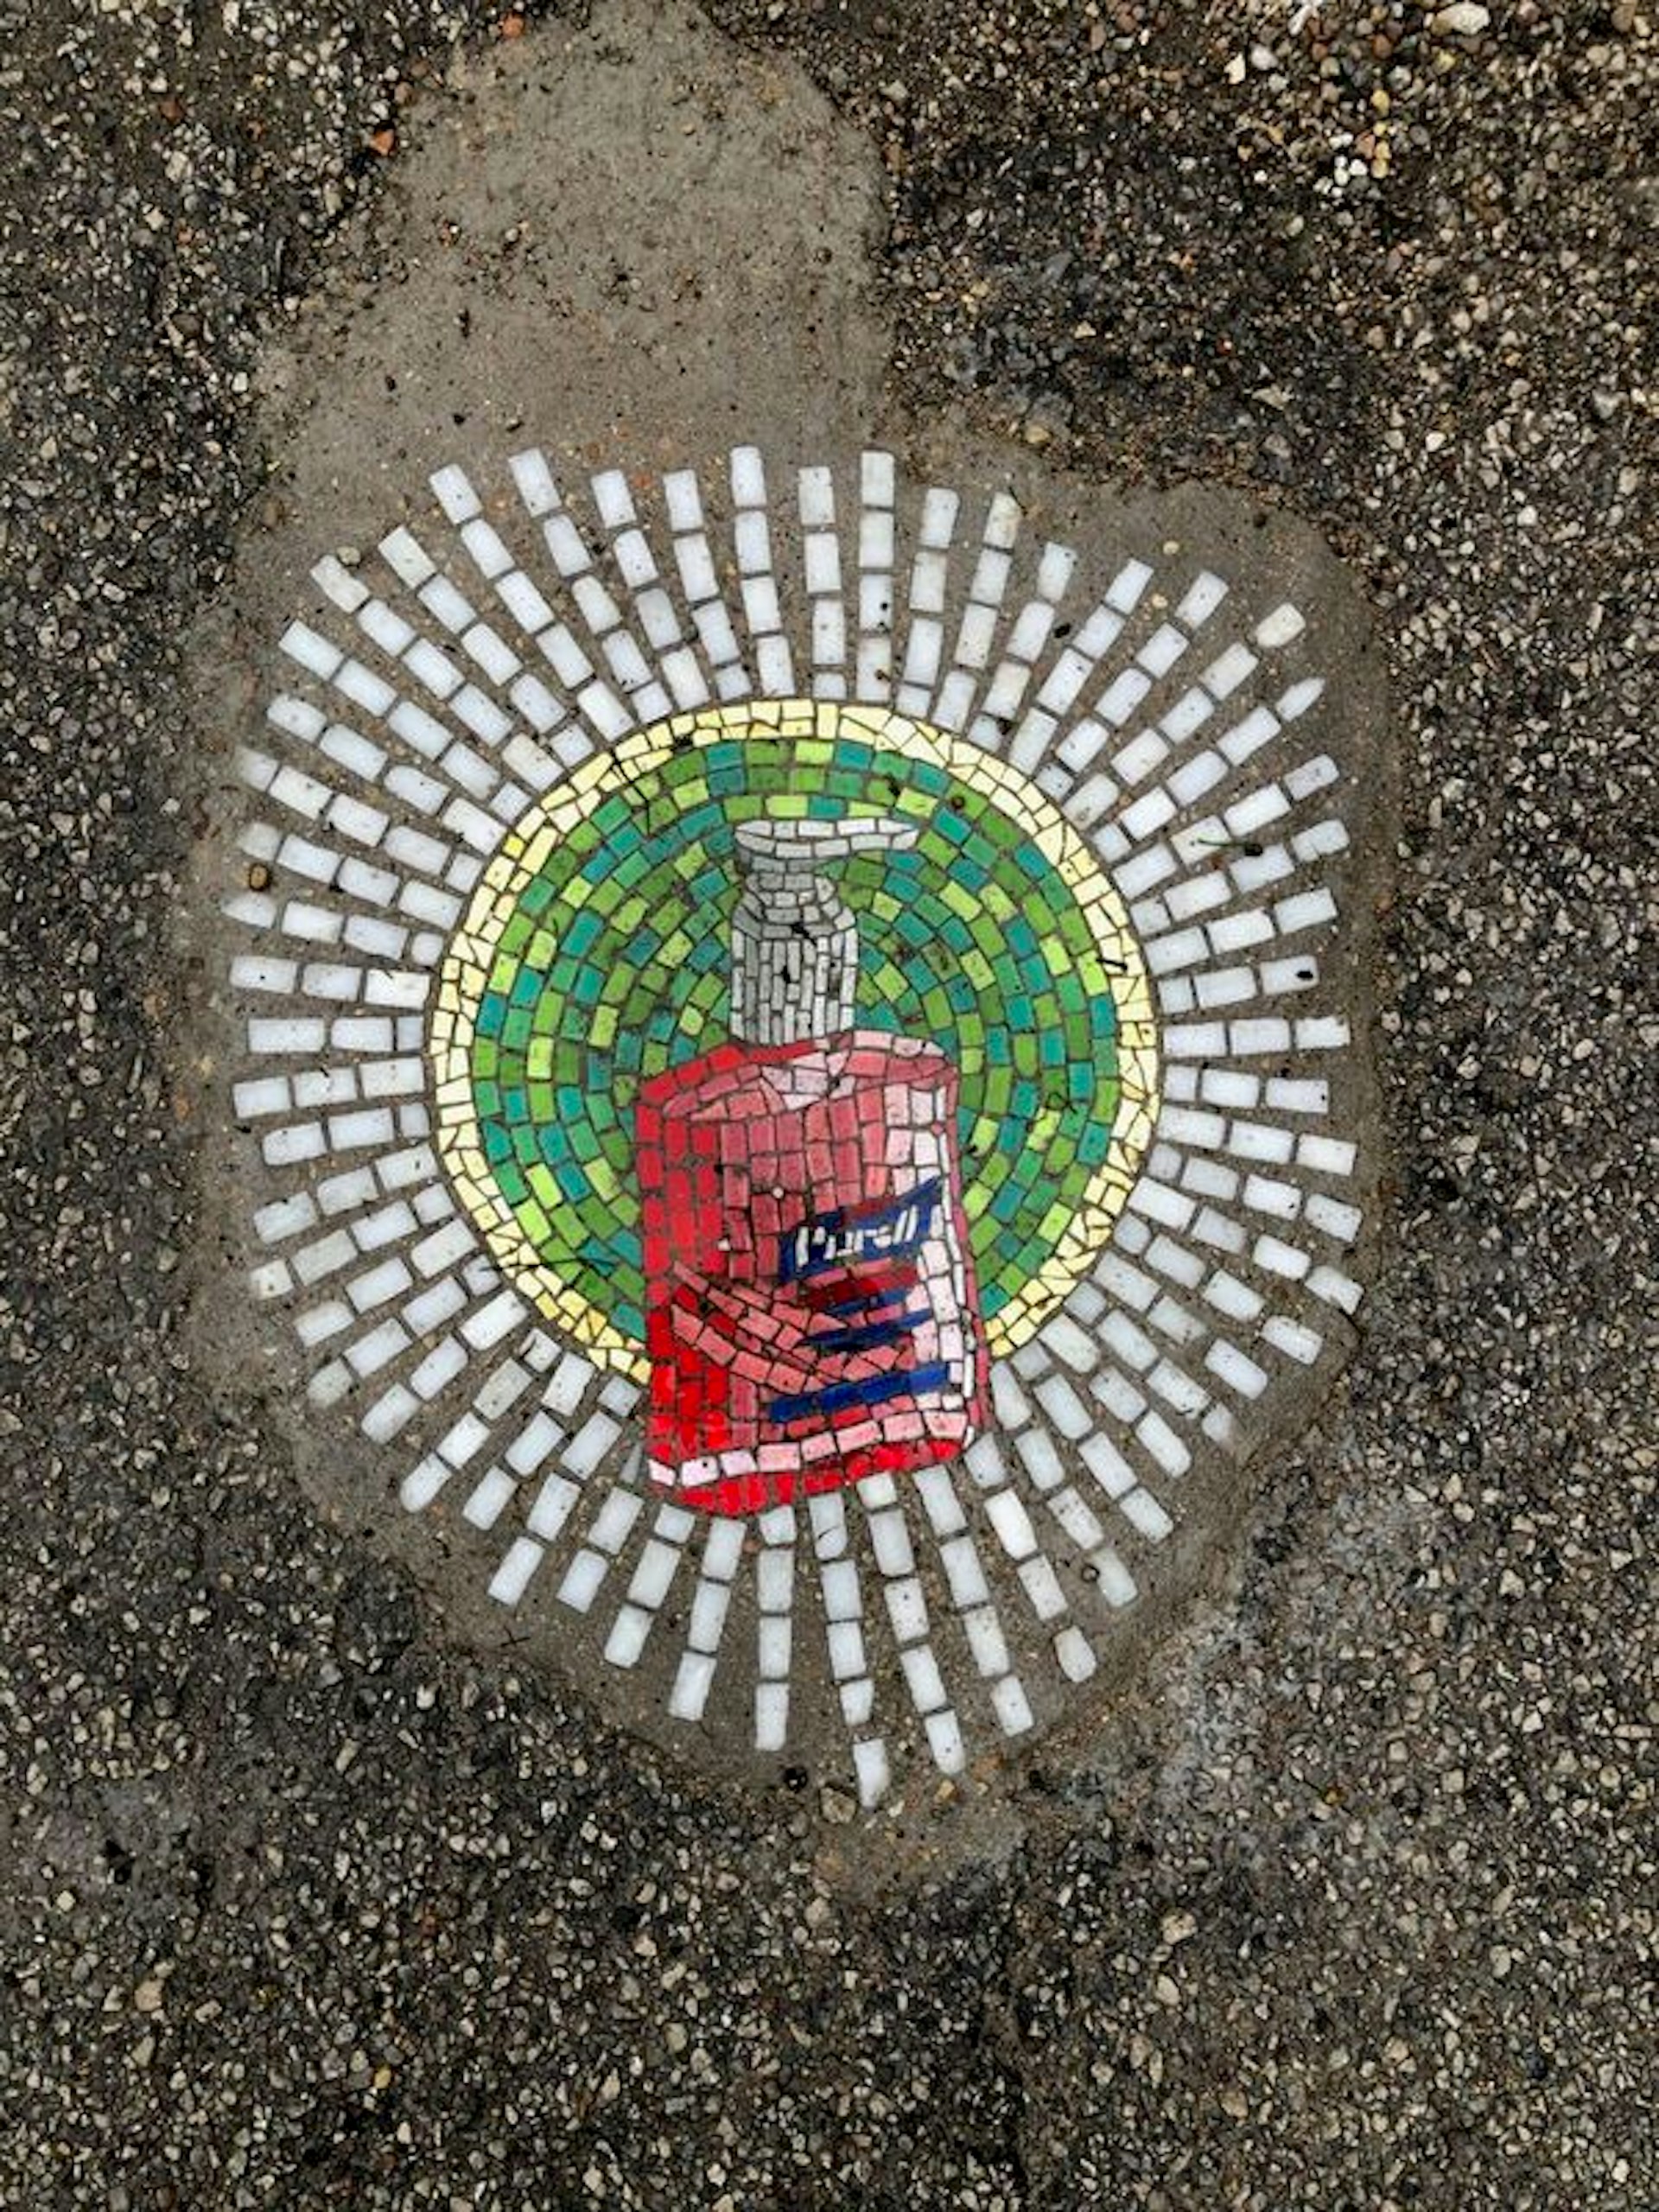 A mosaic depicting a pink bottle of Purell hand sanitizer in a green halo surrounded by white beams of light sits in the pavement of a Chicago pothole